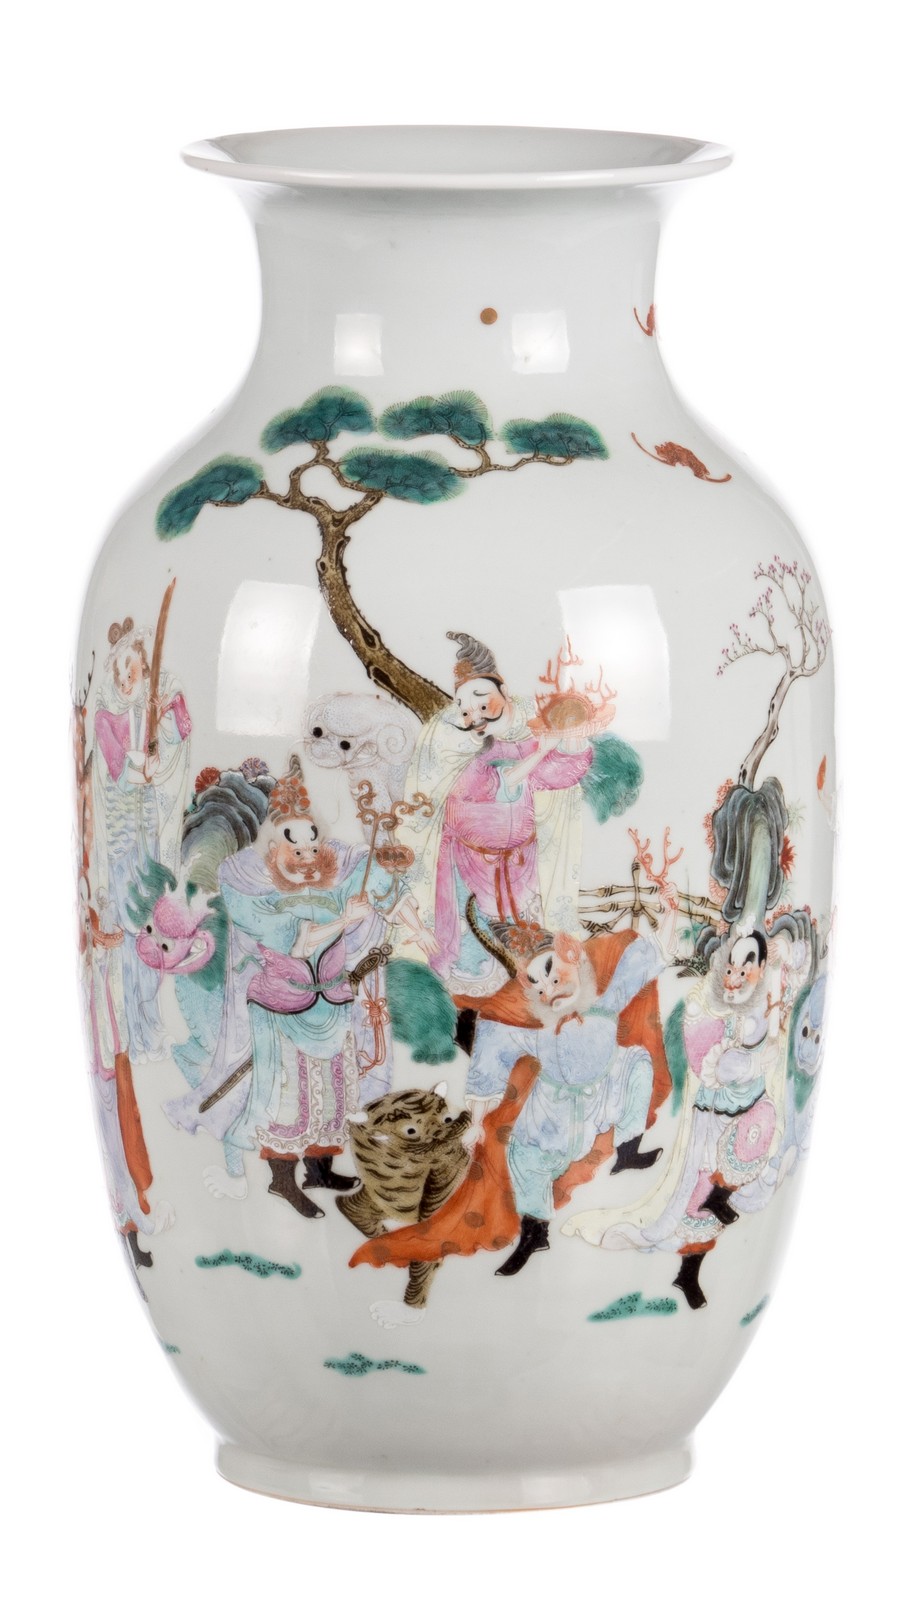 A Chinese famille rose decorated vase with an animated scene with figures and animals, marked